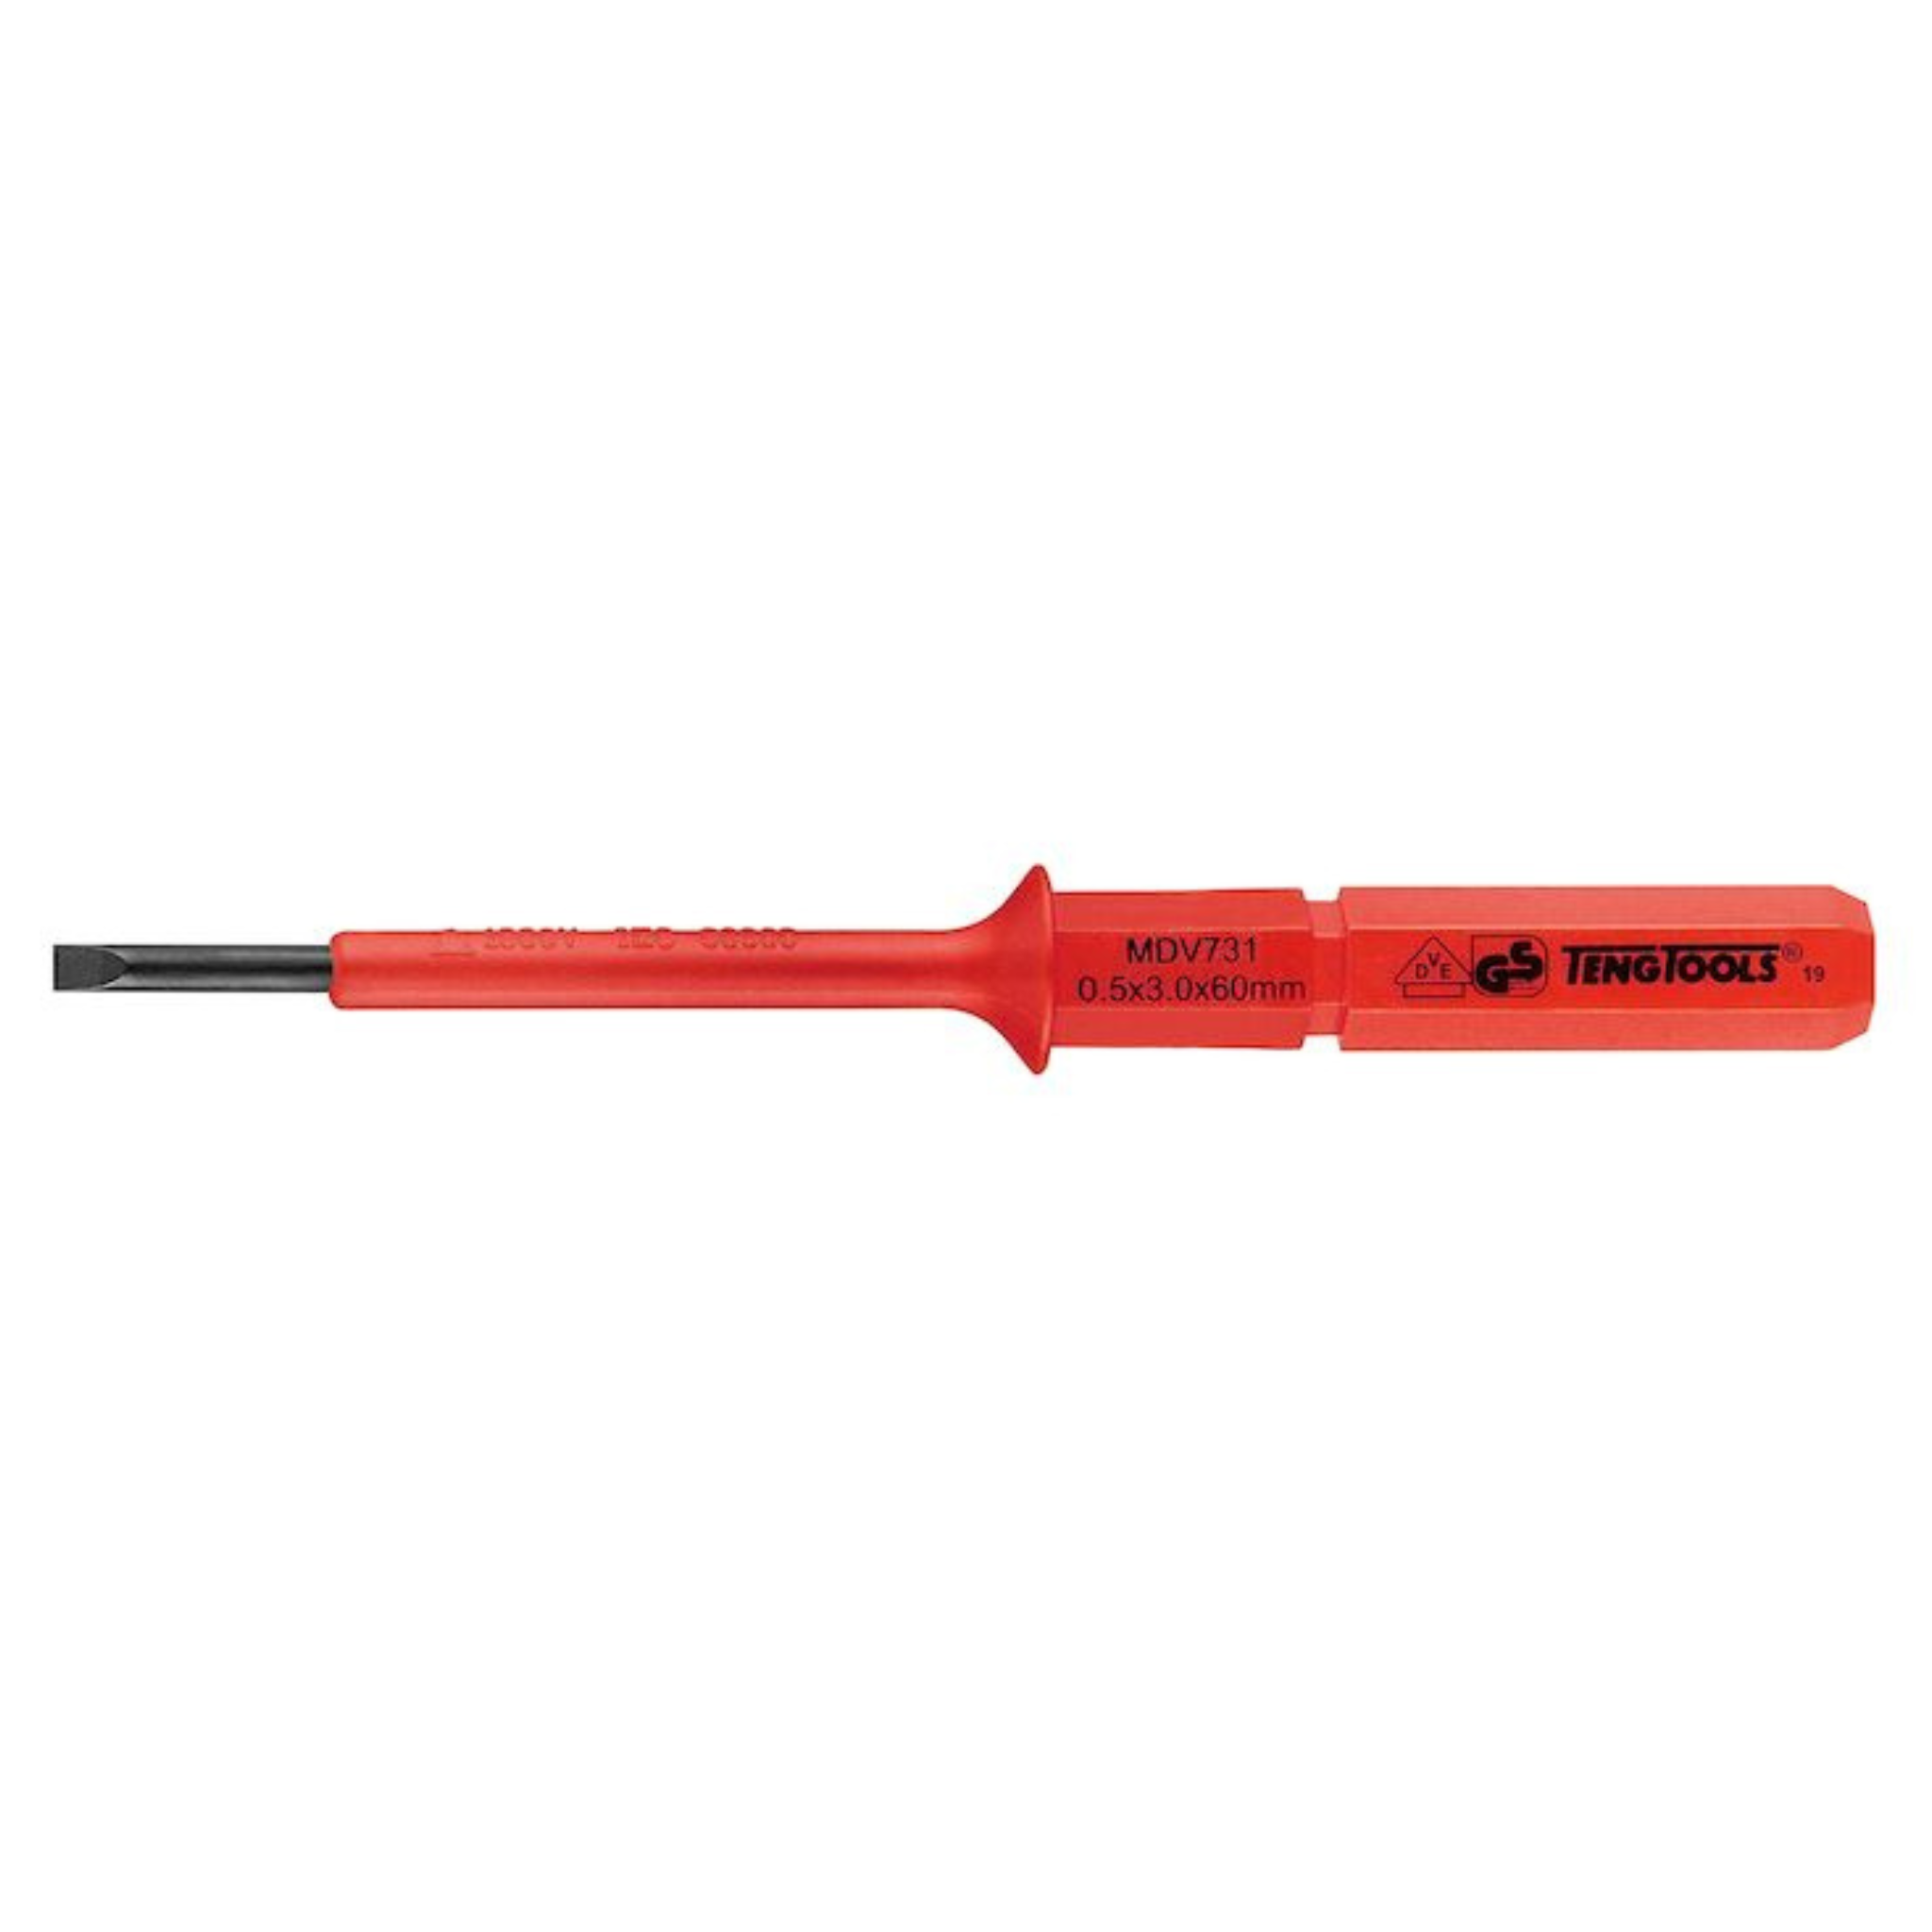 Teng Tools 1000 Volt Insulated Interchangeable Screwdriver Blades - 5.5mm Slotted